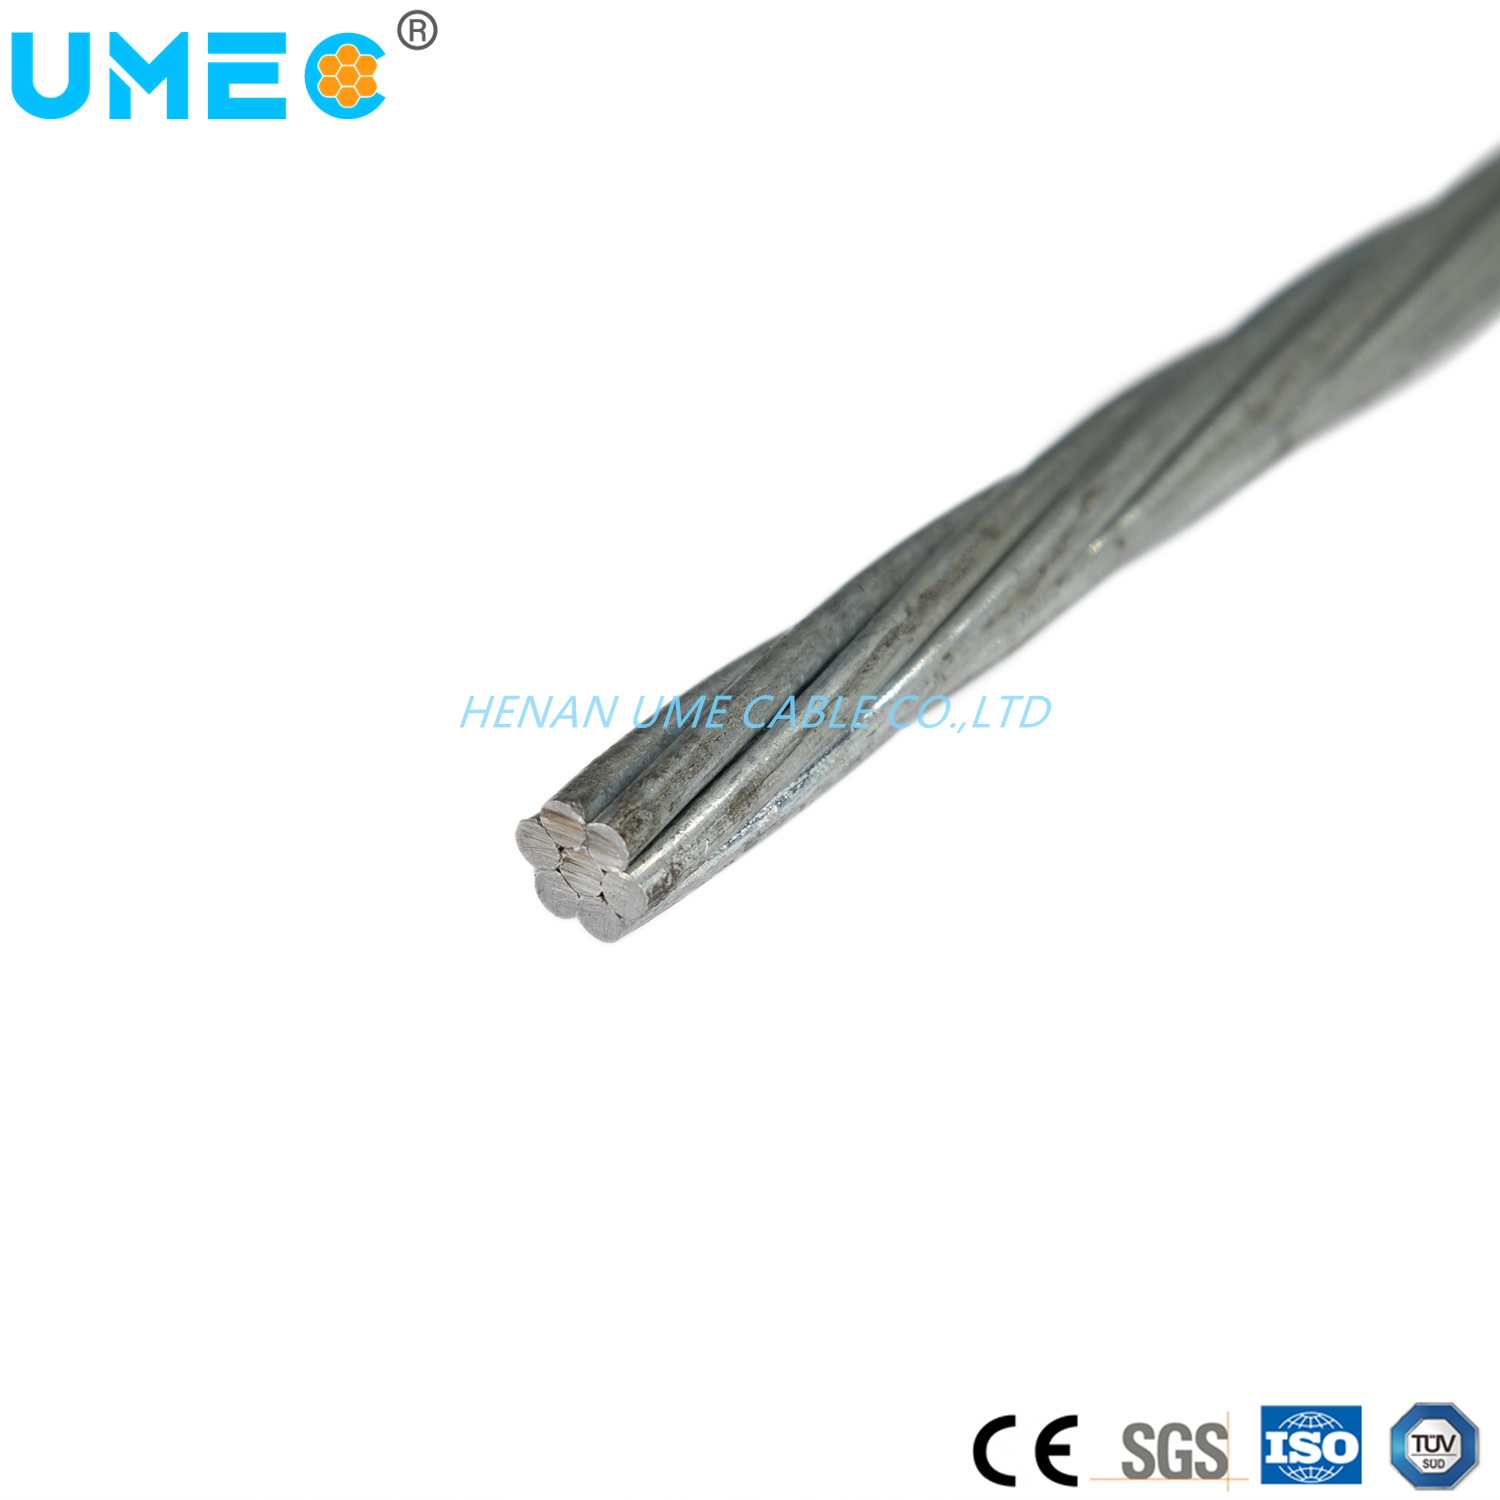 Electrical 1520 MPa Concentrically Stranded Galvanized Zinc Coated Steel Wire Cable/Guy Wire for General Purpose Electric Cable